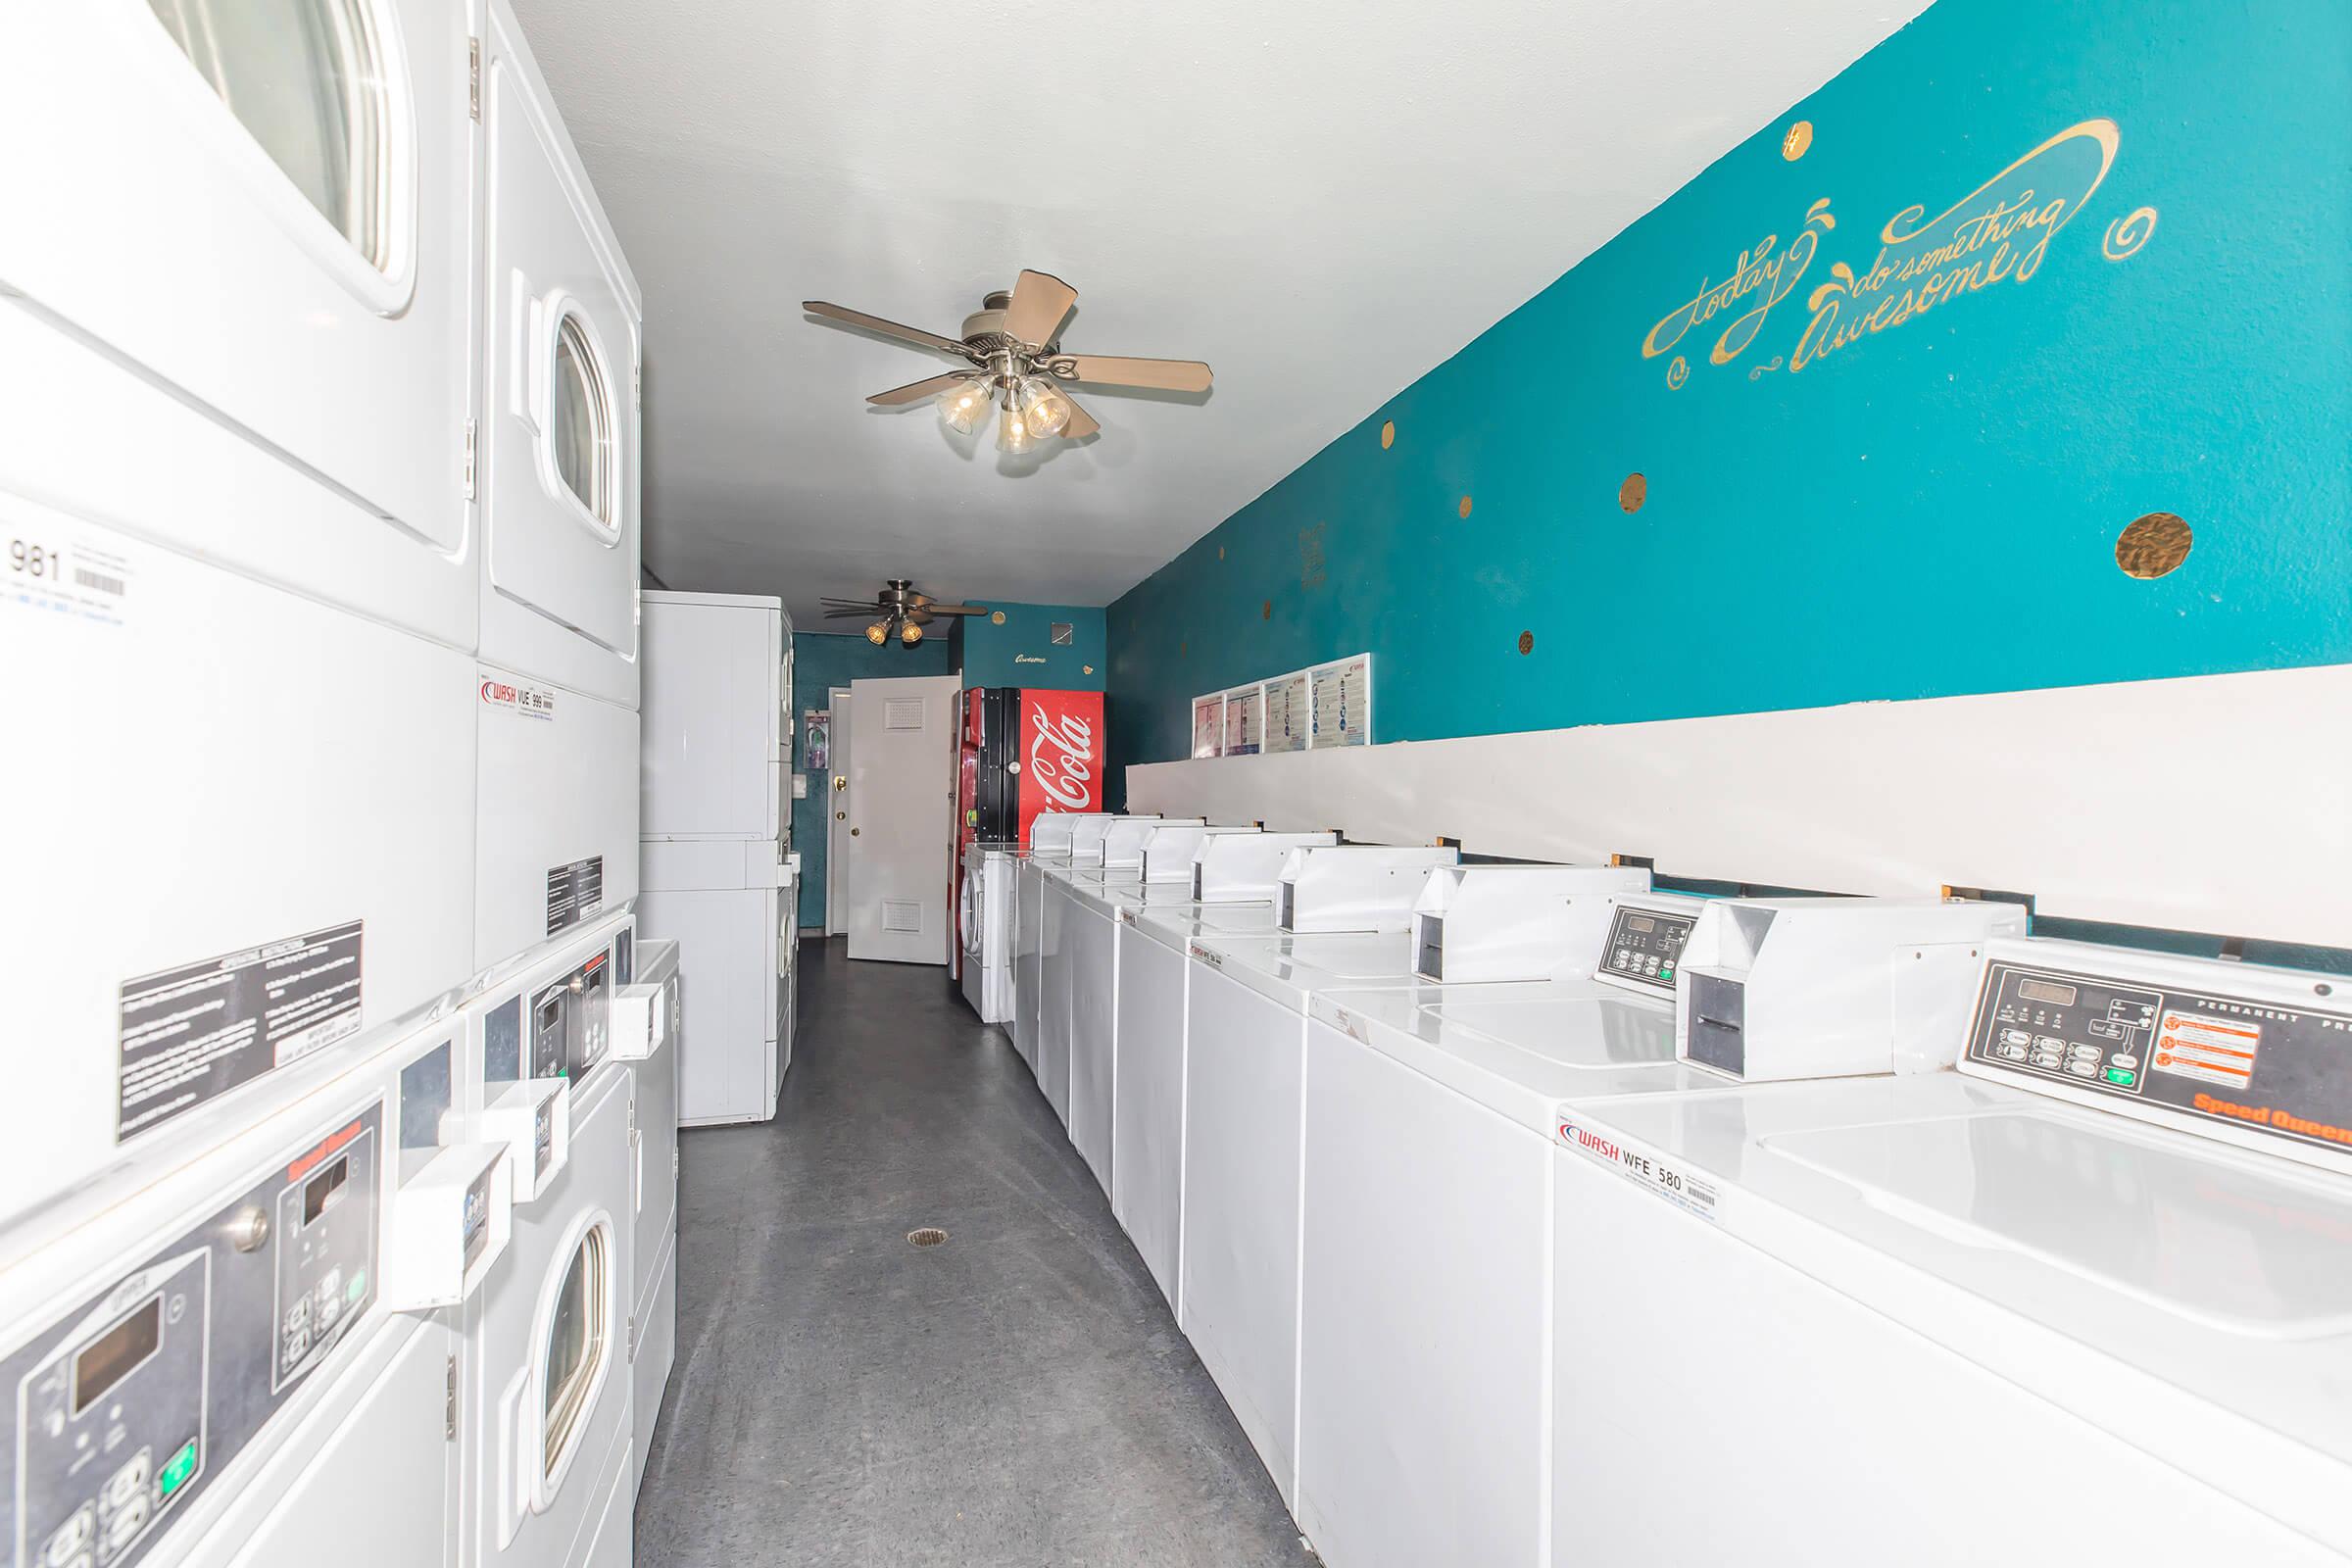 Washers and Dryers in the community laundry room